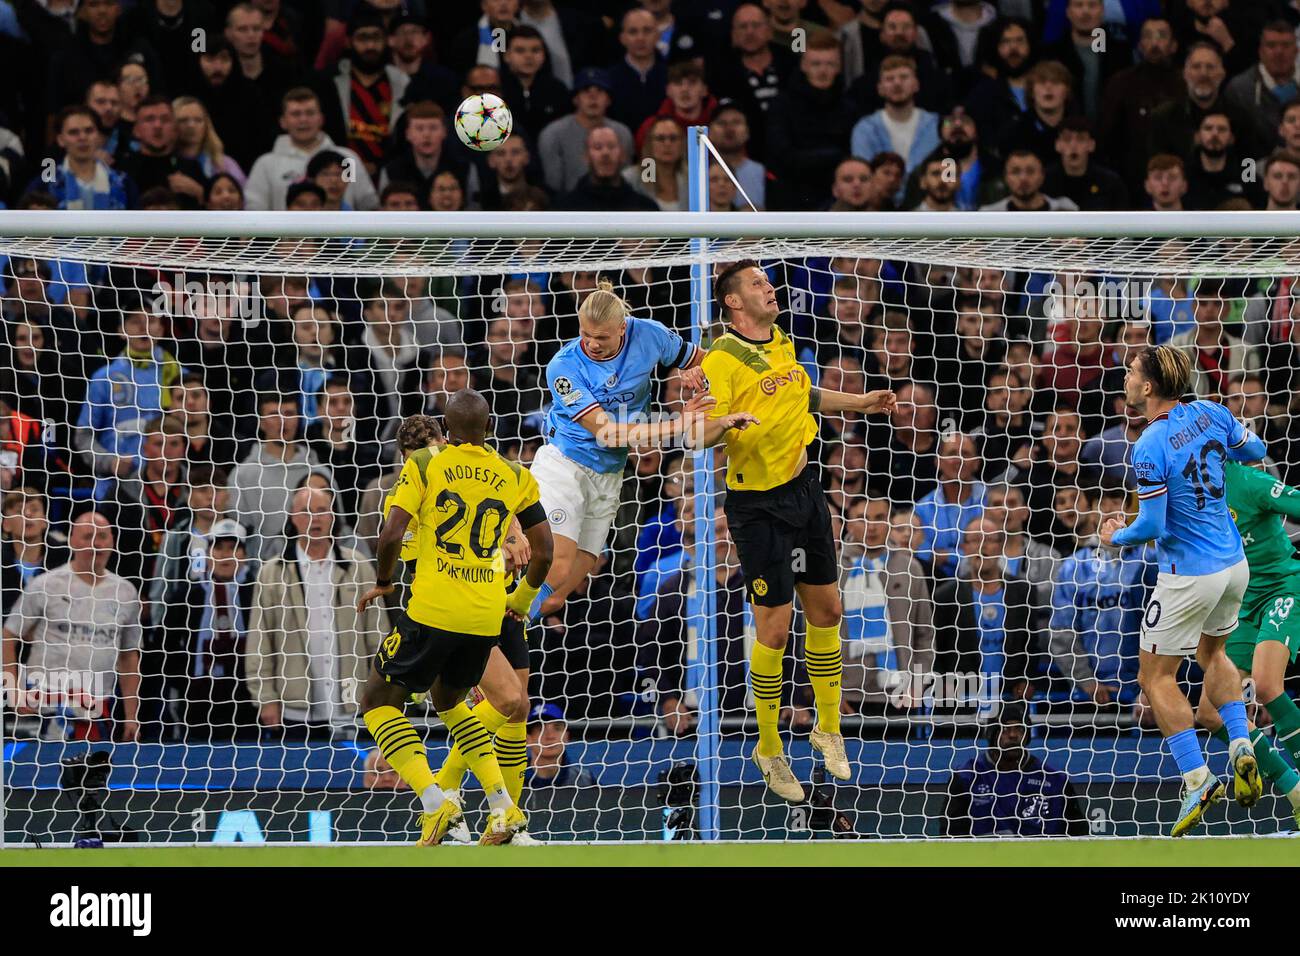 Manchester, UK. 14th Sep, 2022. Thomas Meunier #24 of Borussia Dortmund and Erling Håland #9 of Manchester City battle for the ball during the UEFA Champions League match Manchester City vs Borussia Dortmund at Etihad Stadium, Manchester, United Kingdom, 14th September 2022 (Photo by Conor Molloy/News Images) Credit: News Images LTD/Alamy Live News Stock Photo